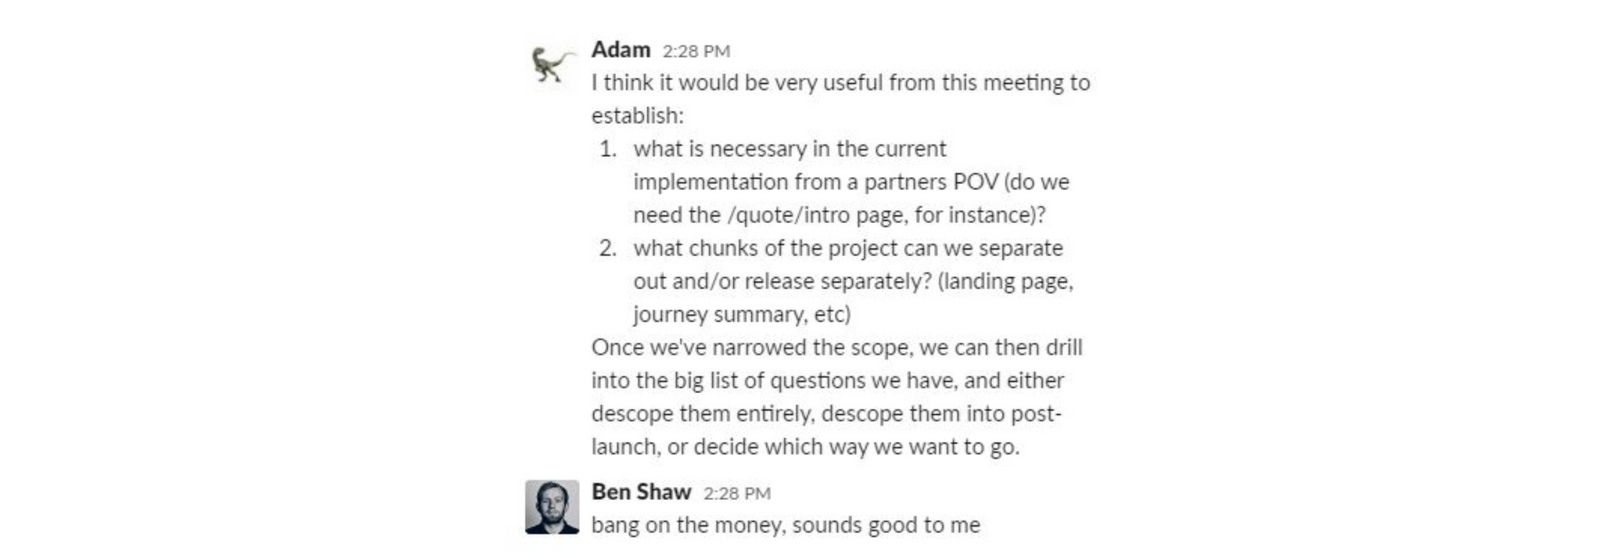 Slack Chat between Urban Jungle Engineers about upcoming project